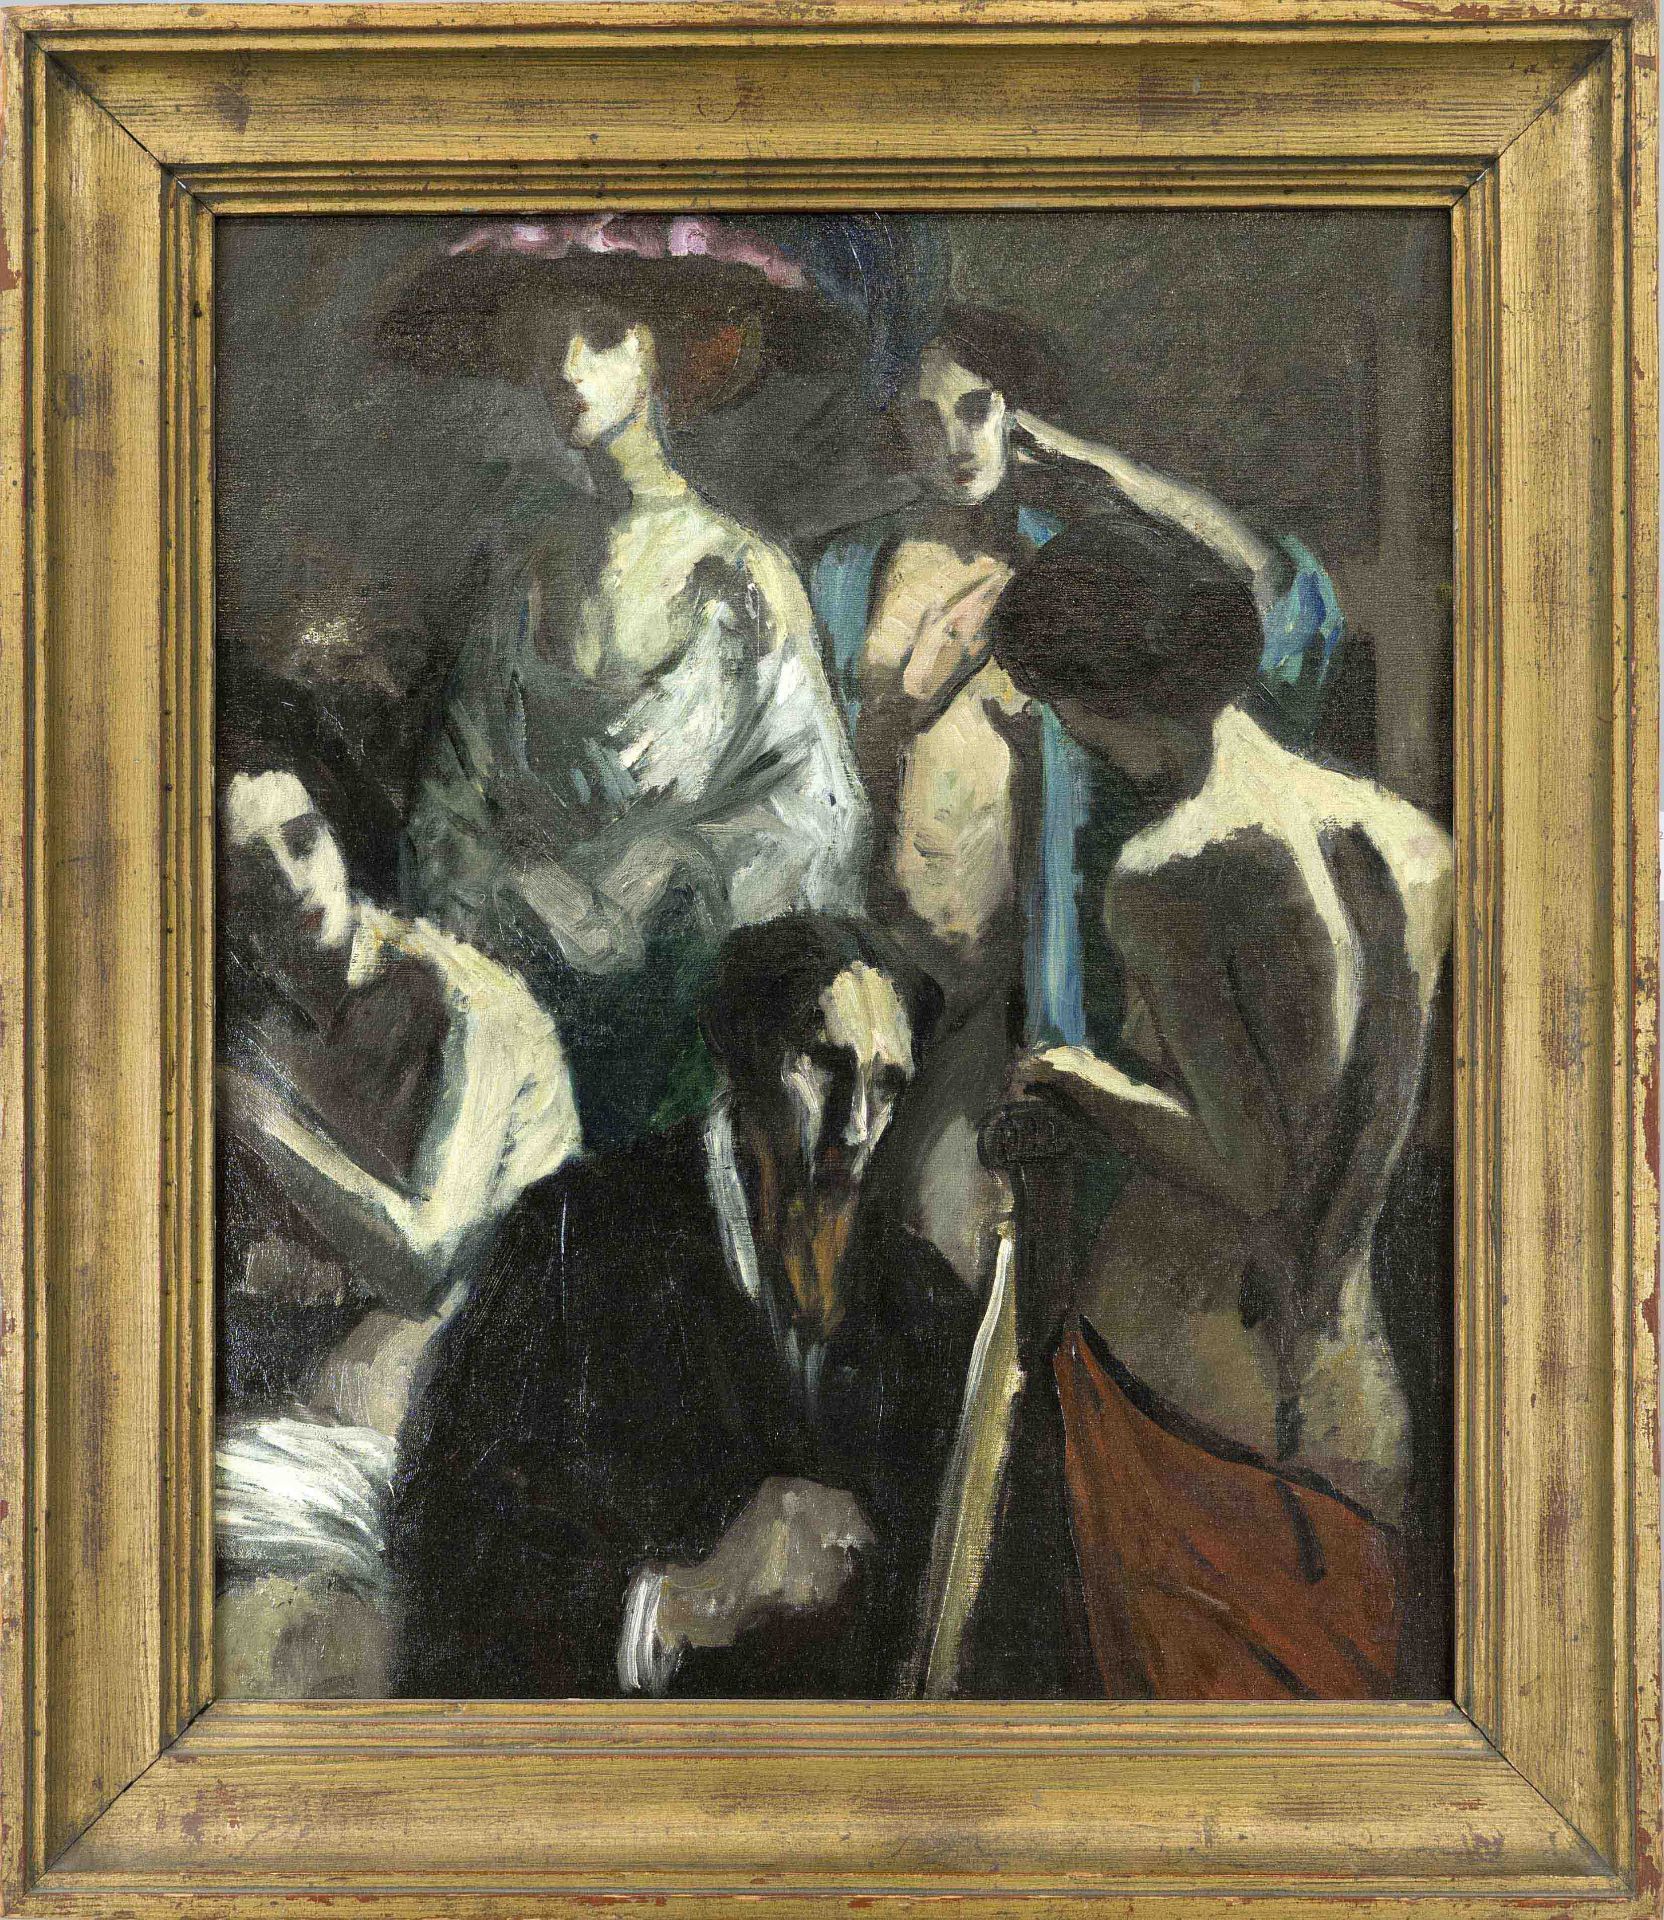 Anonymous Expressionist, c. 1910, dark studio scene with an artist surrounded by his muses, oil on